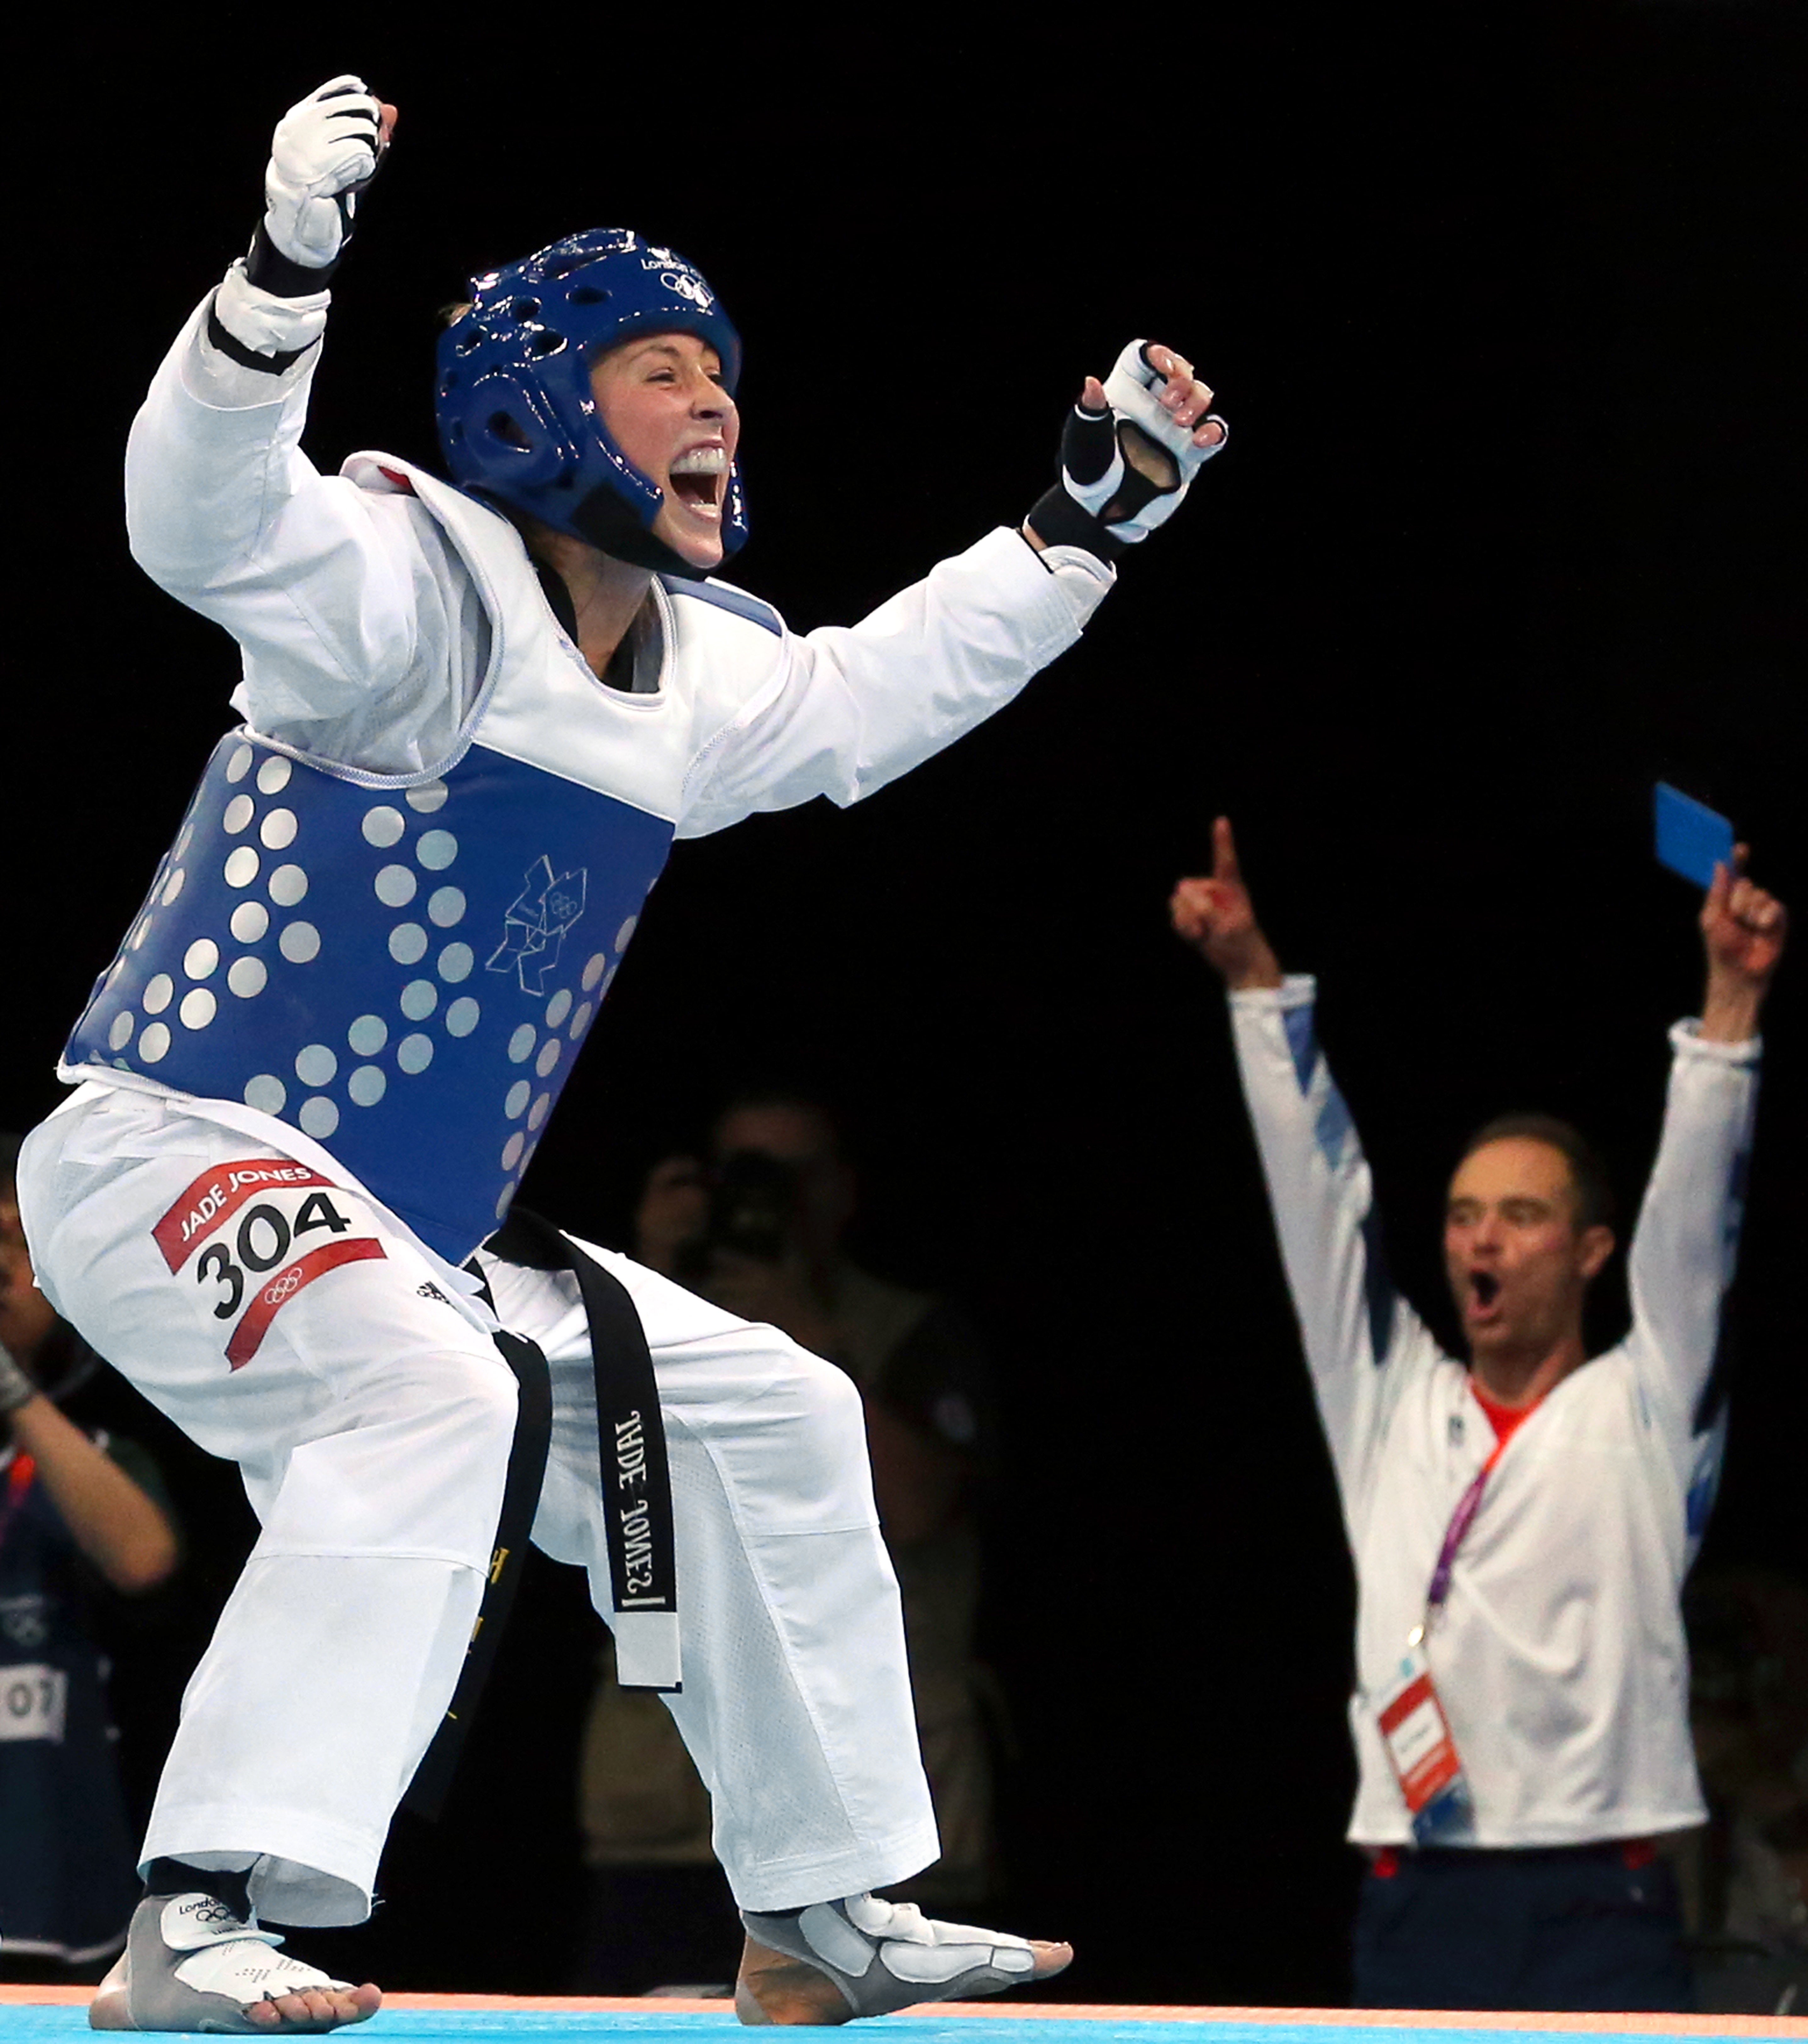 Jade Jones claimed gold against China’s Yuzhuo Hou in the women’s -57kg taekwondo final (Andrew Milligan/PA)